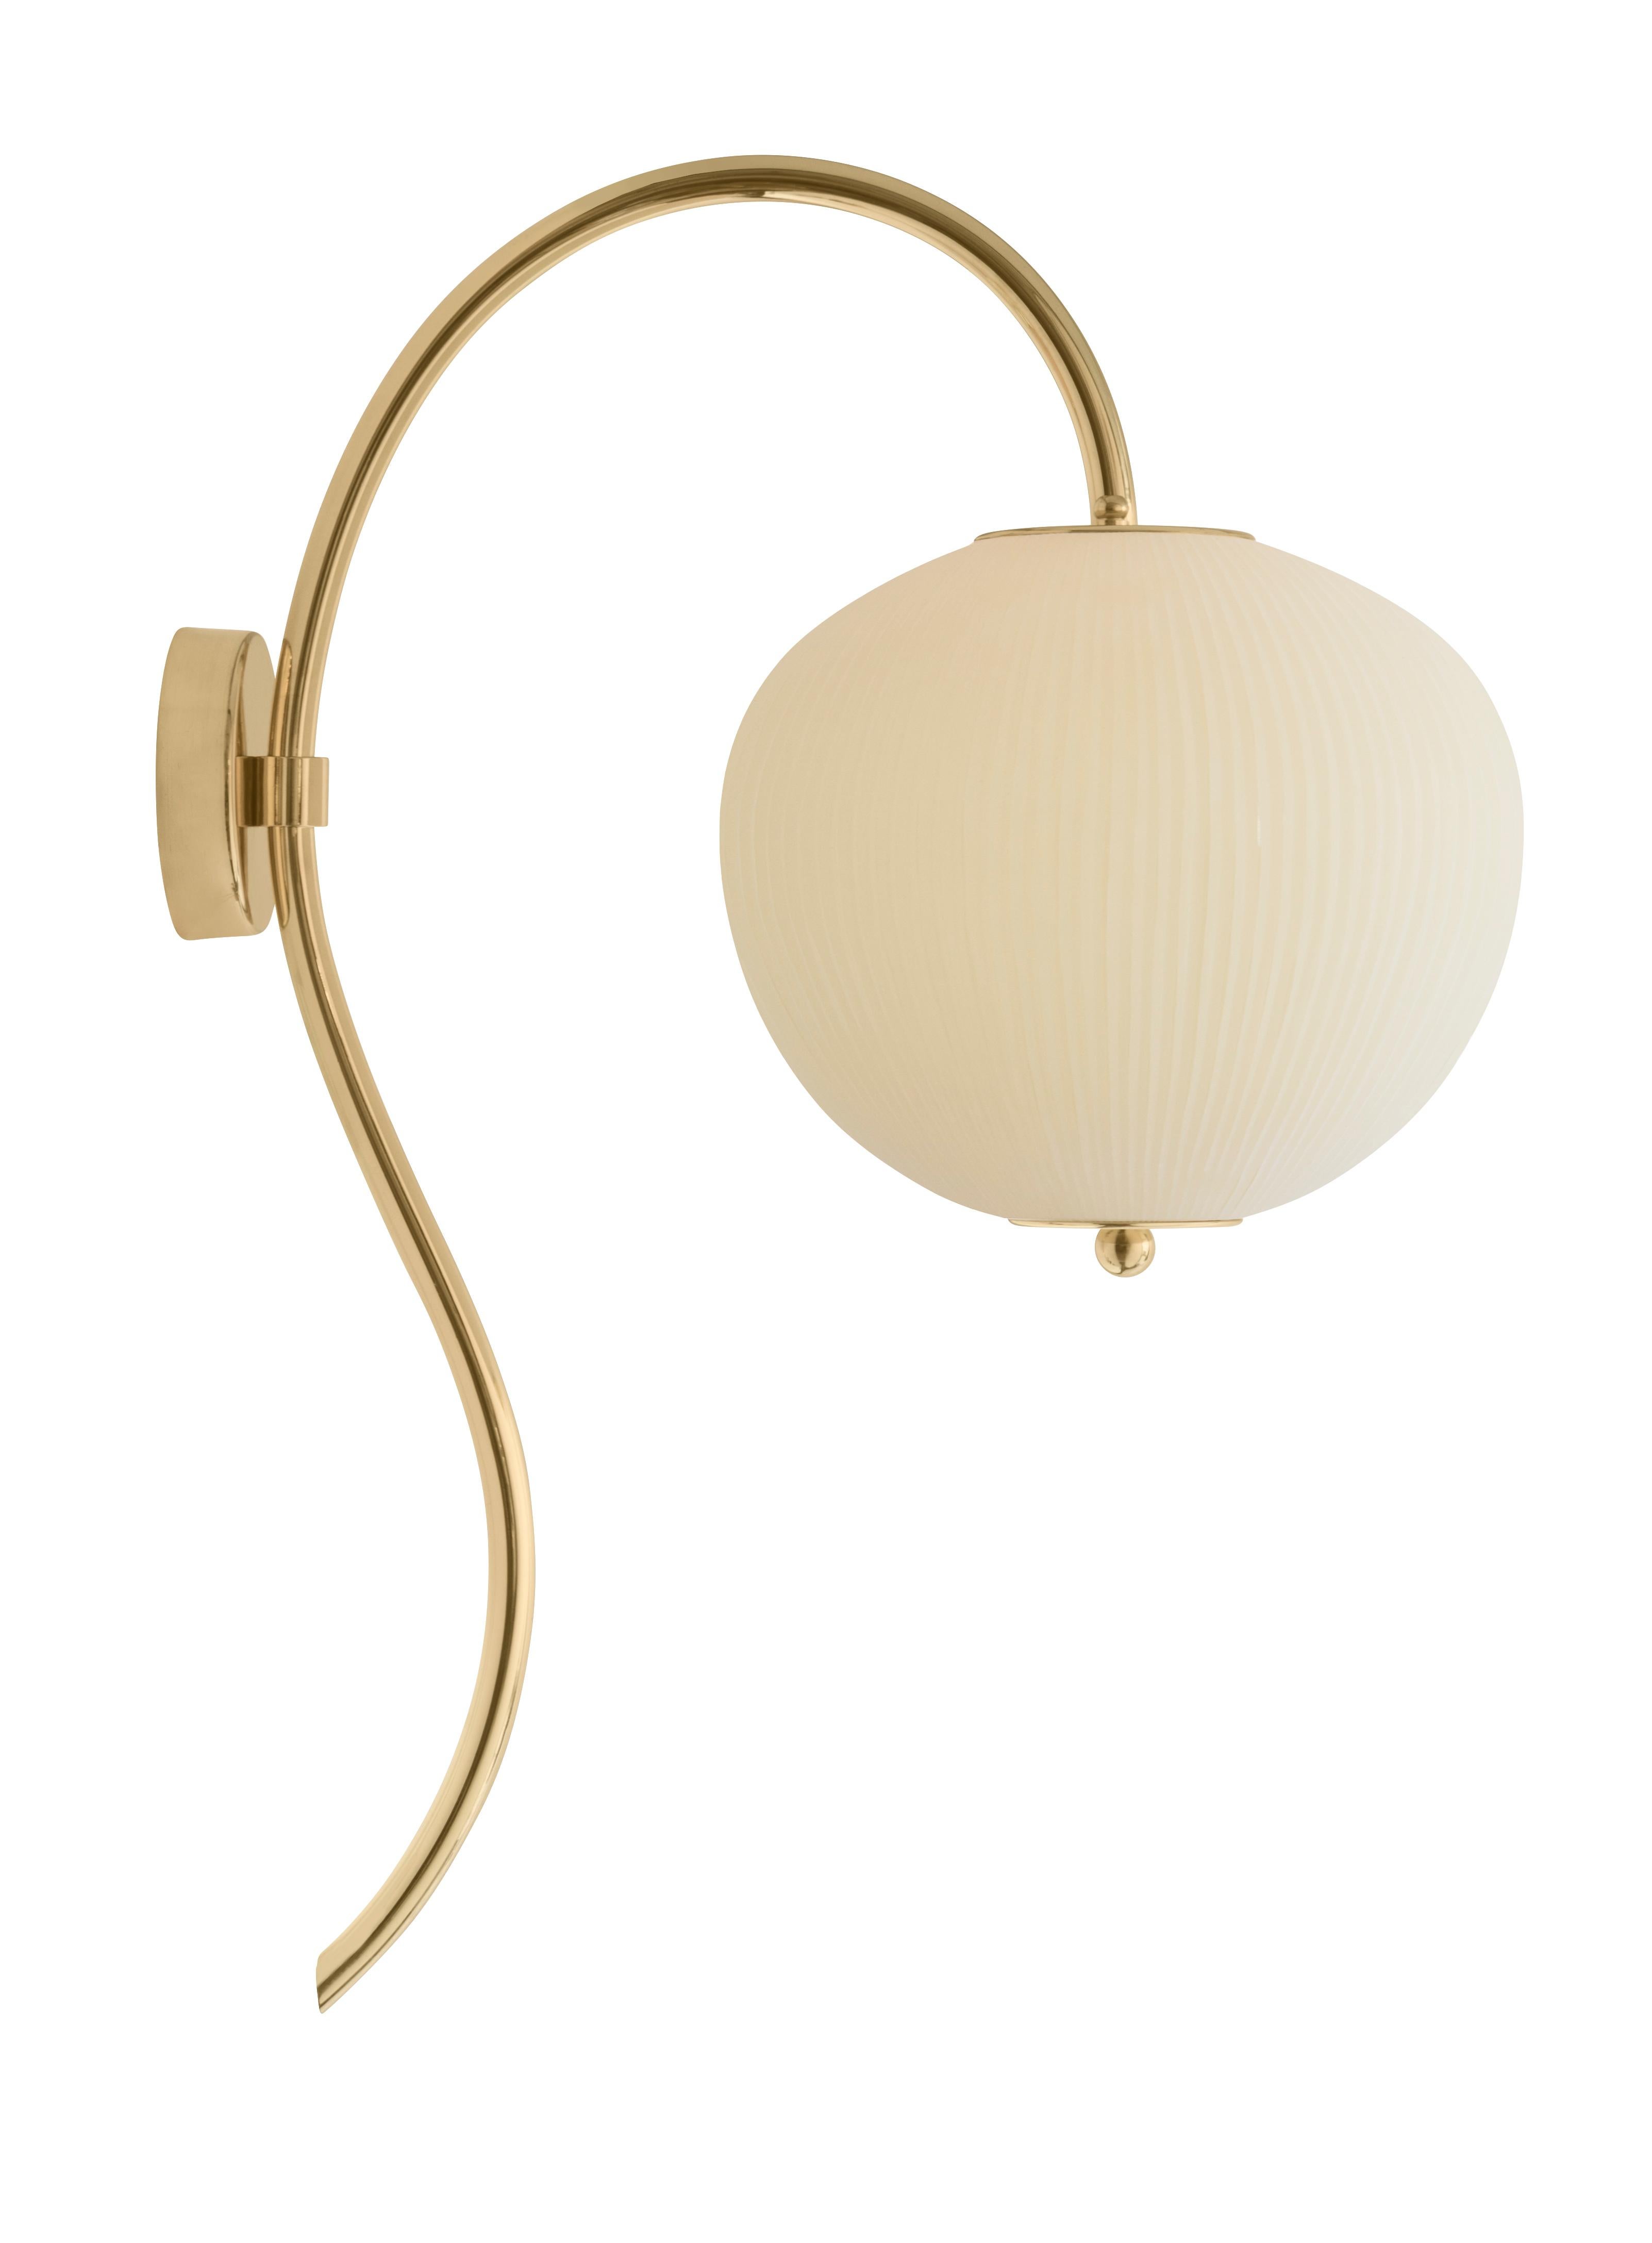 Wall lamp China 03 by Magic Circus Editions
Dimensions: H 62 x W 26.2 x D 41.5 cm
Materials: Brass, mouth blown glass sculpted with a diamond saw
Colour: soft rose

Available finishes: Brass, nickel
Available colours: enamel soft white, soft